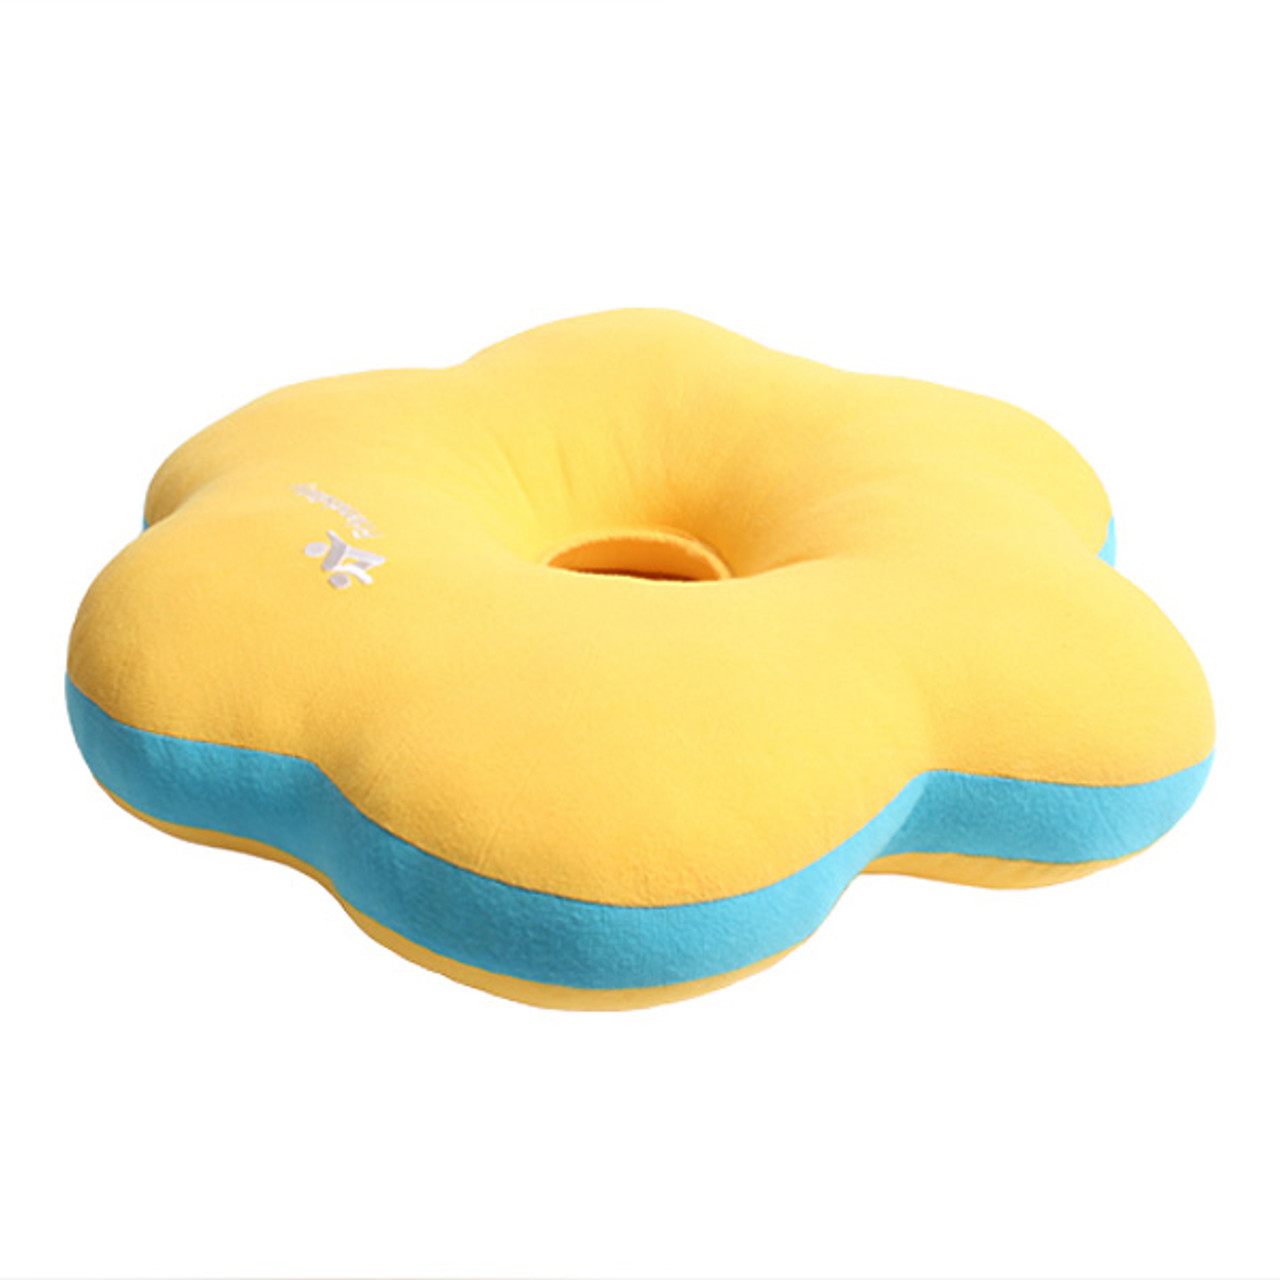 Bradcal Perineal Cushion - Yellow, Official Retailer